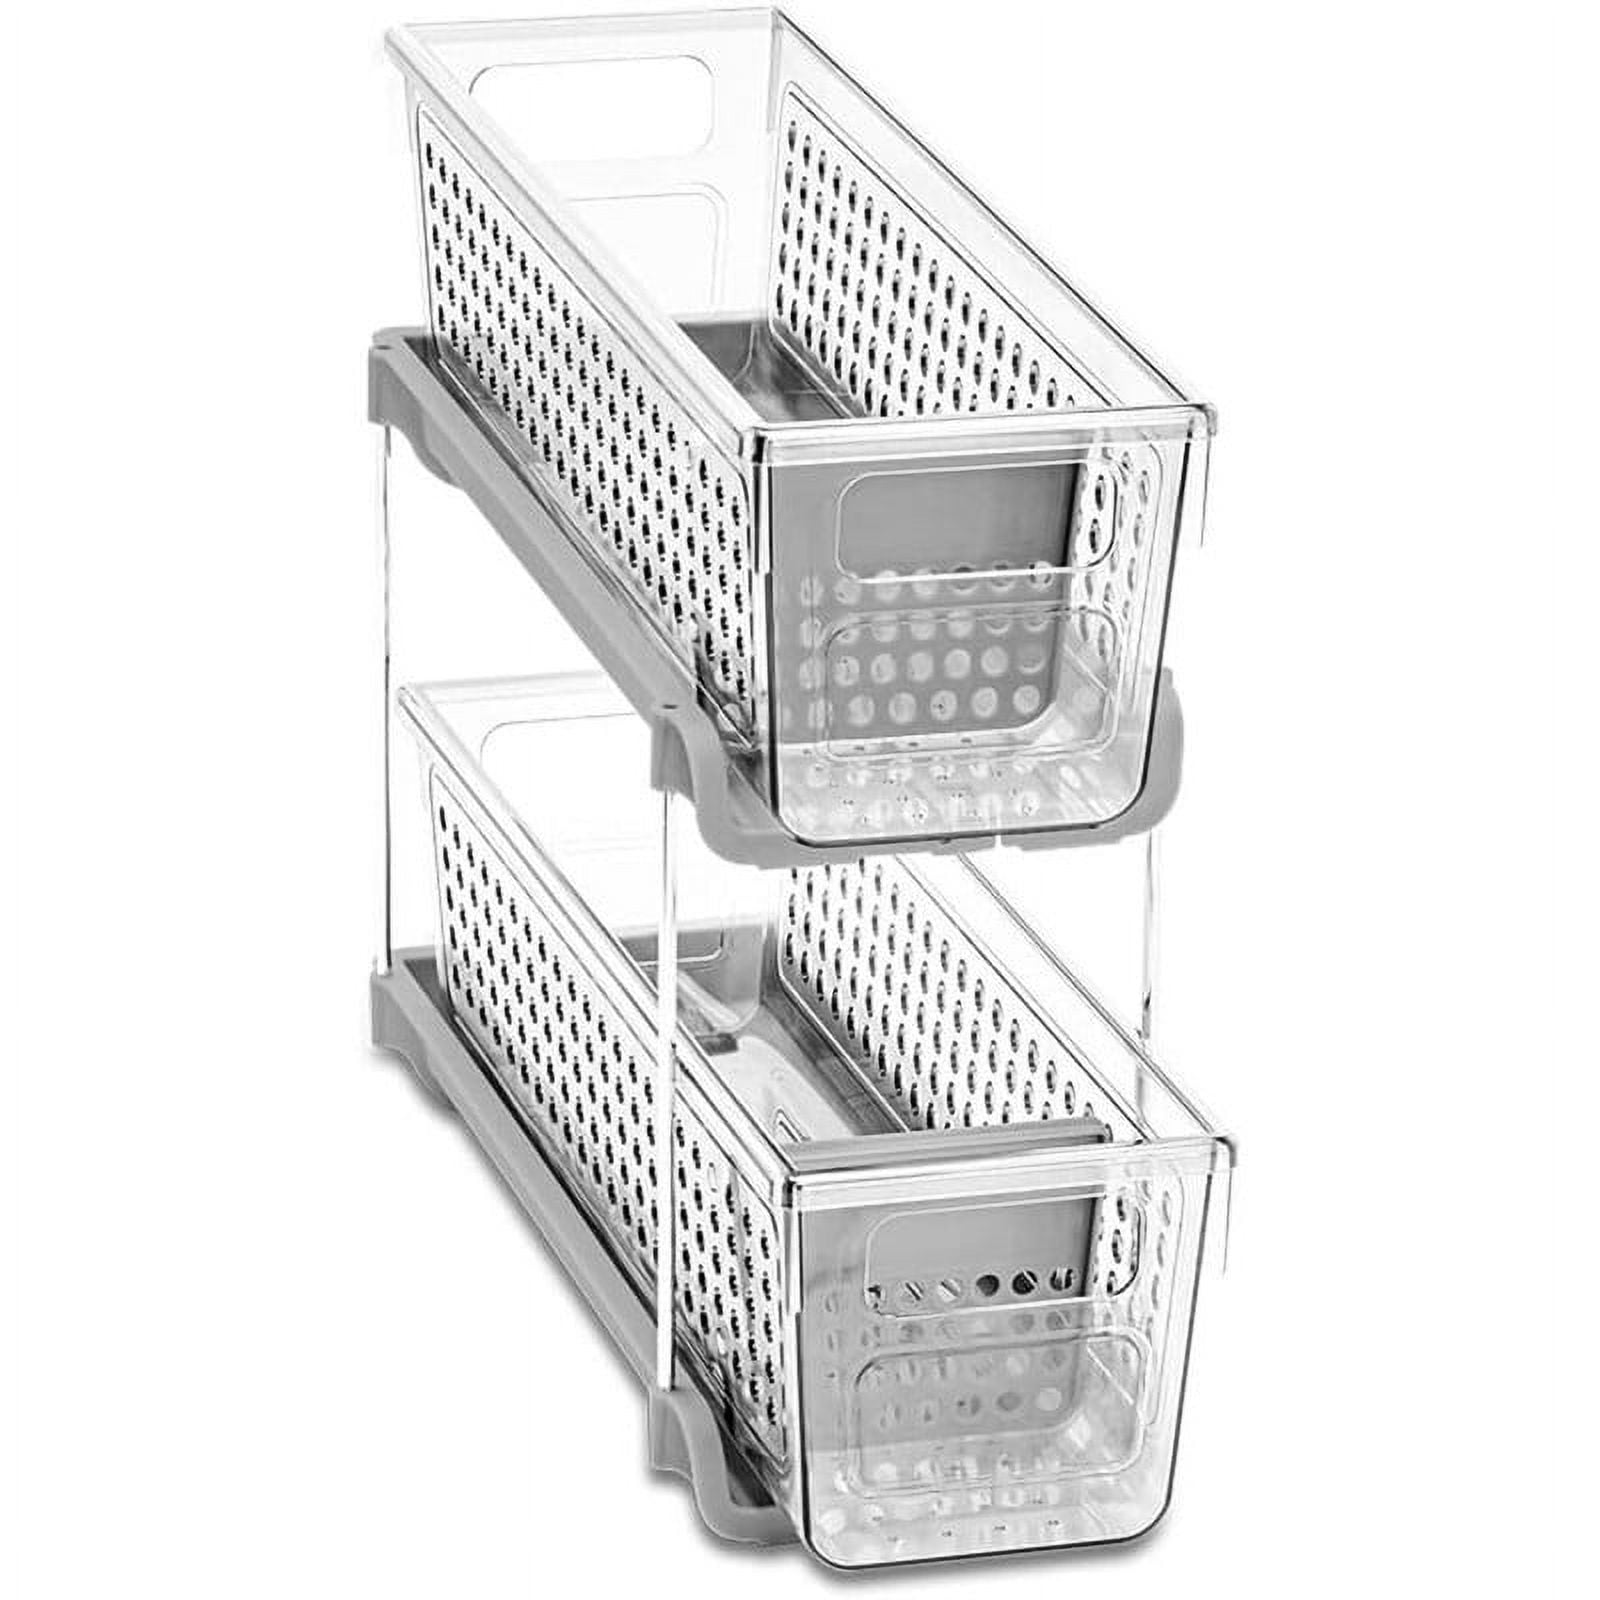 Madesmart 9-in W x 10.63-in H 2-Tier Freestanding Plastic Pull-out